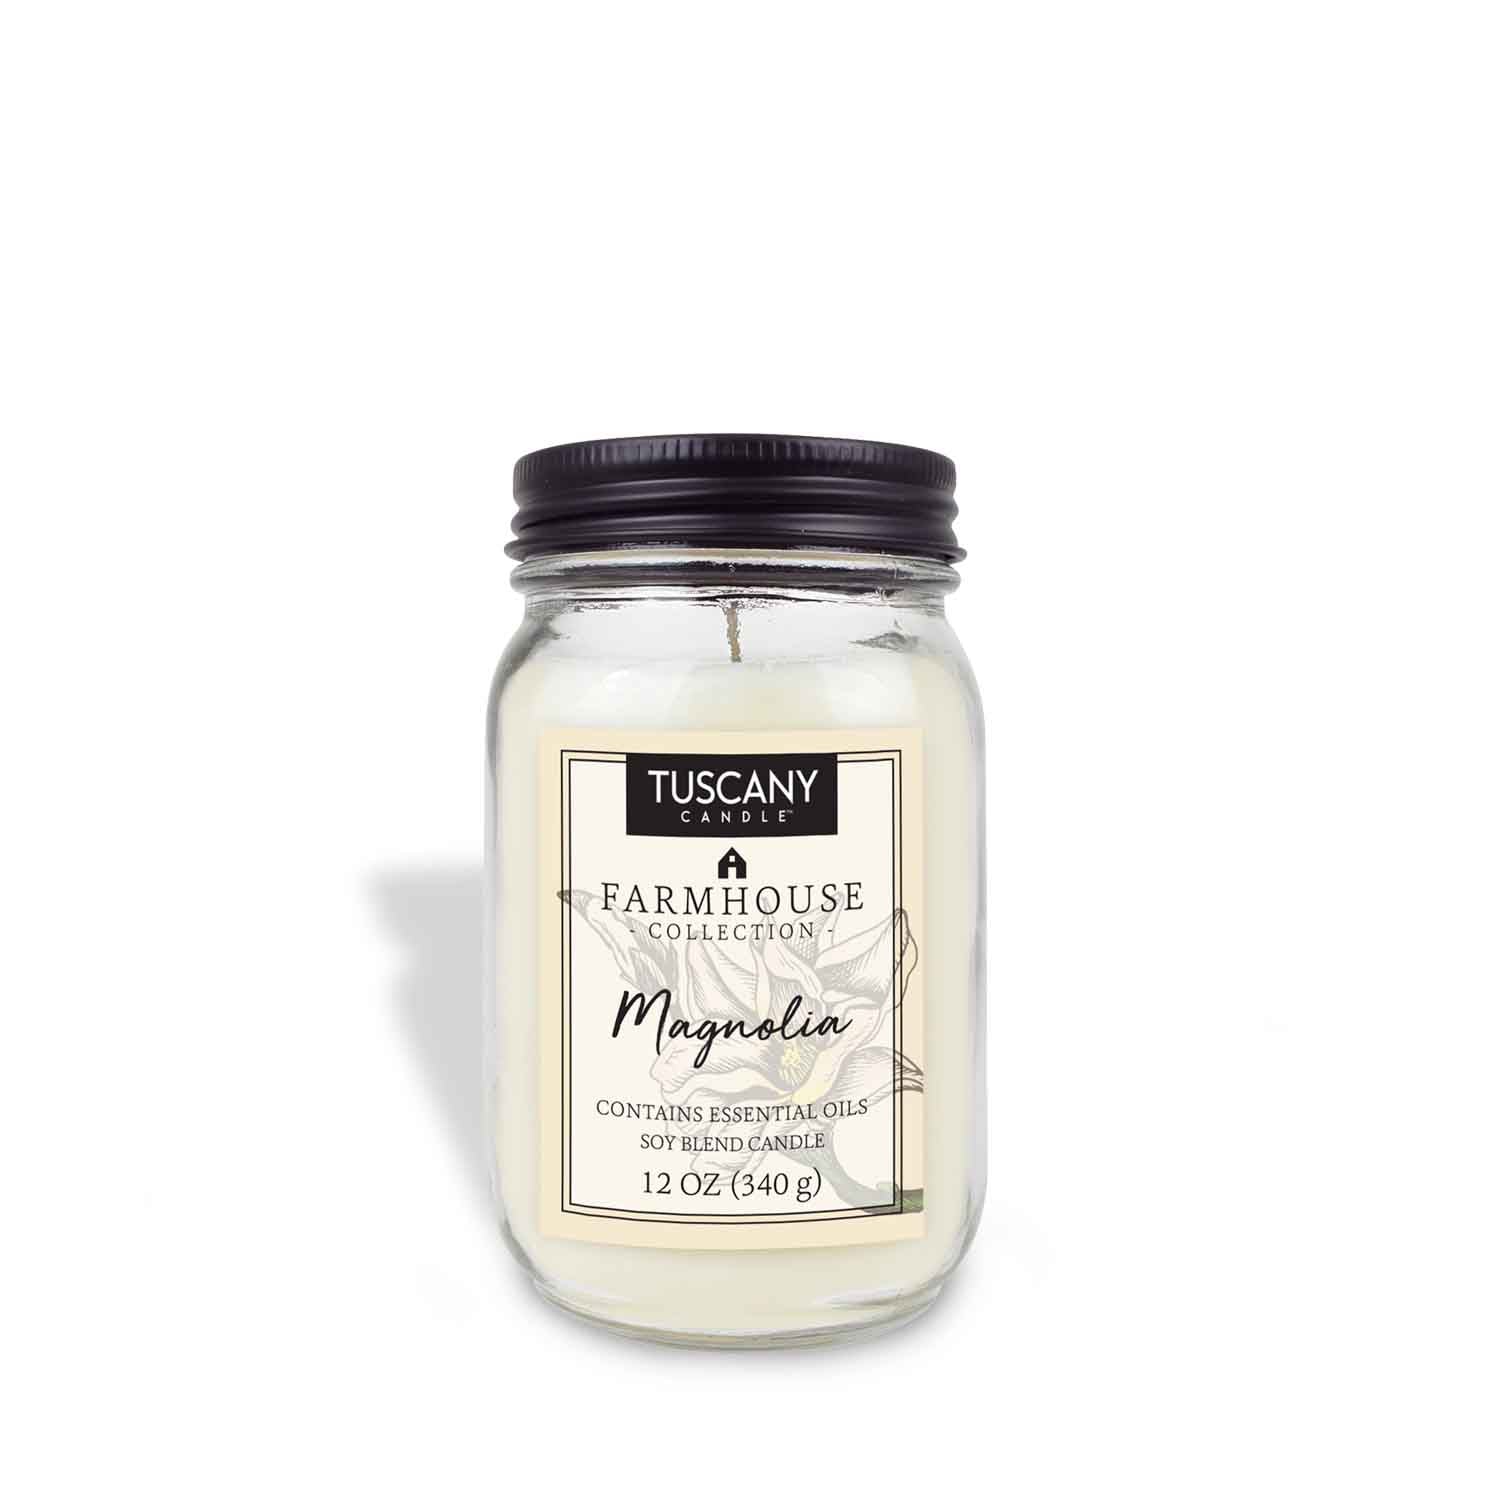 Magnolia Candle -Just Makes Scents Candles & Gifts